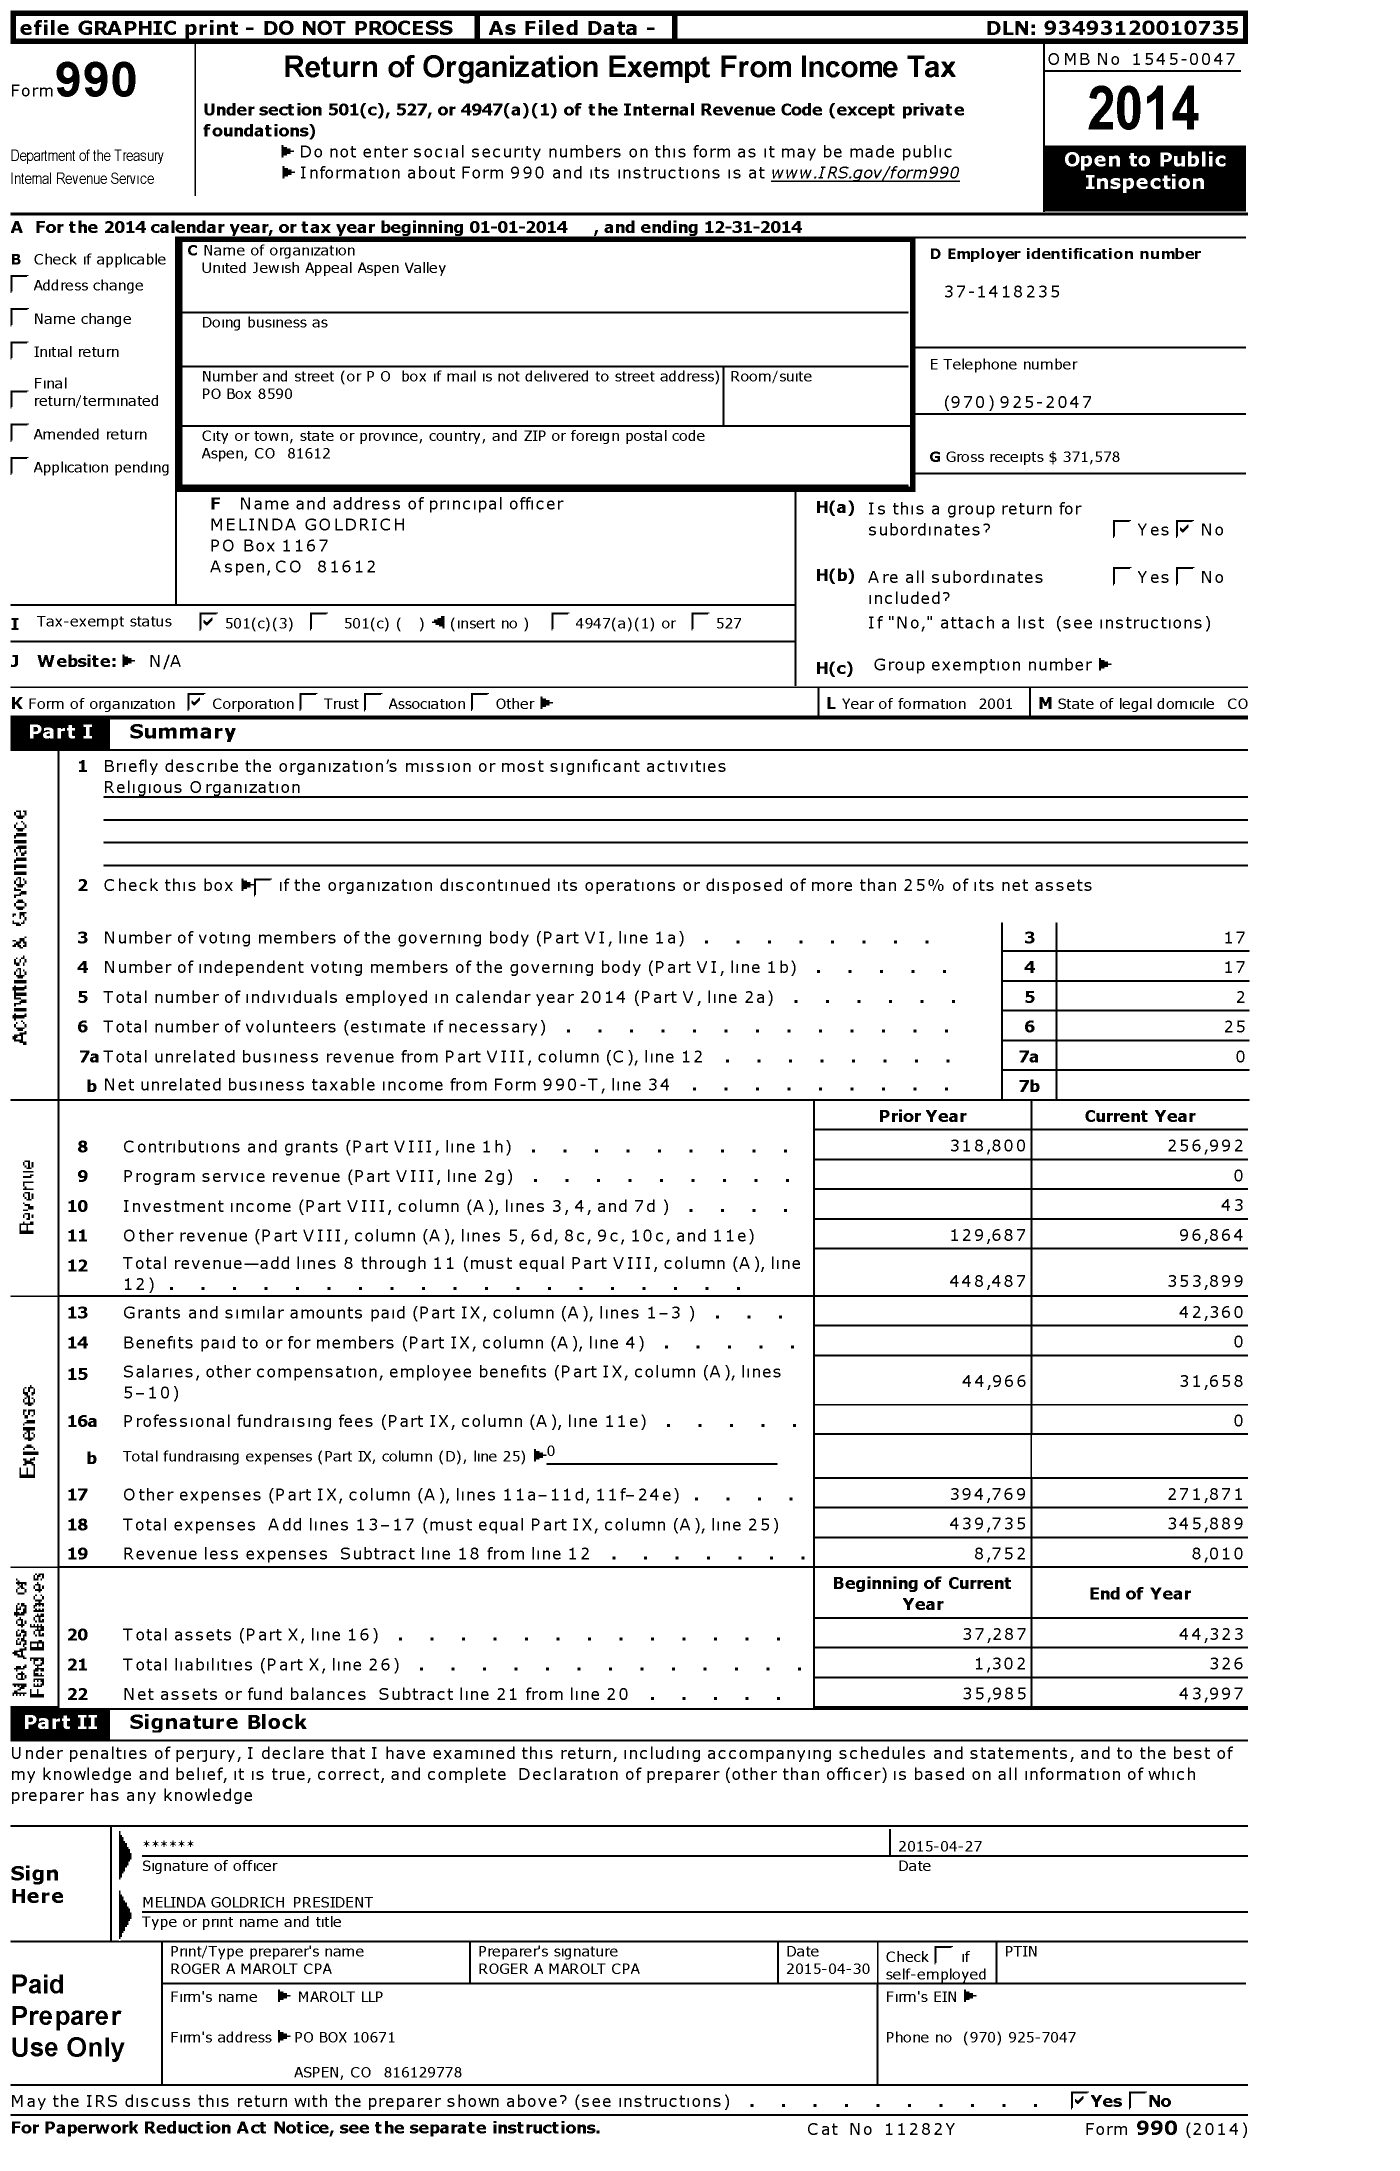 Image of first page of 2014 Form 990 for United Jewish Appeal Aspen Valley Campaign